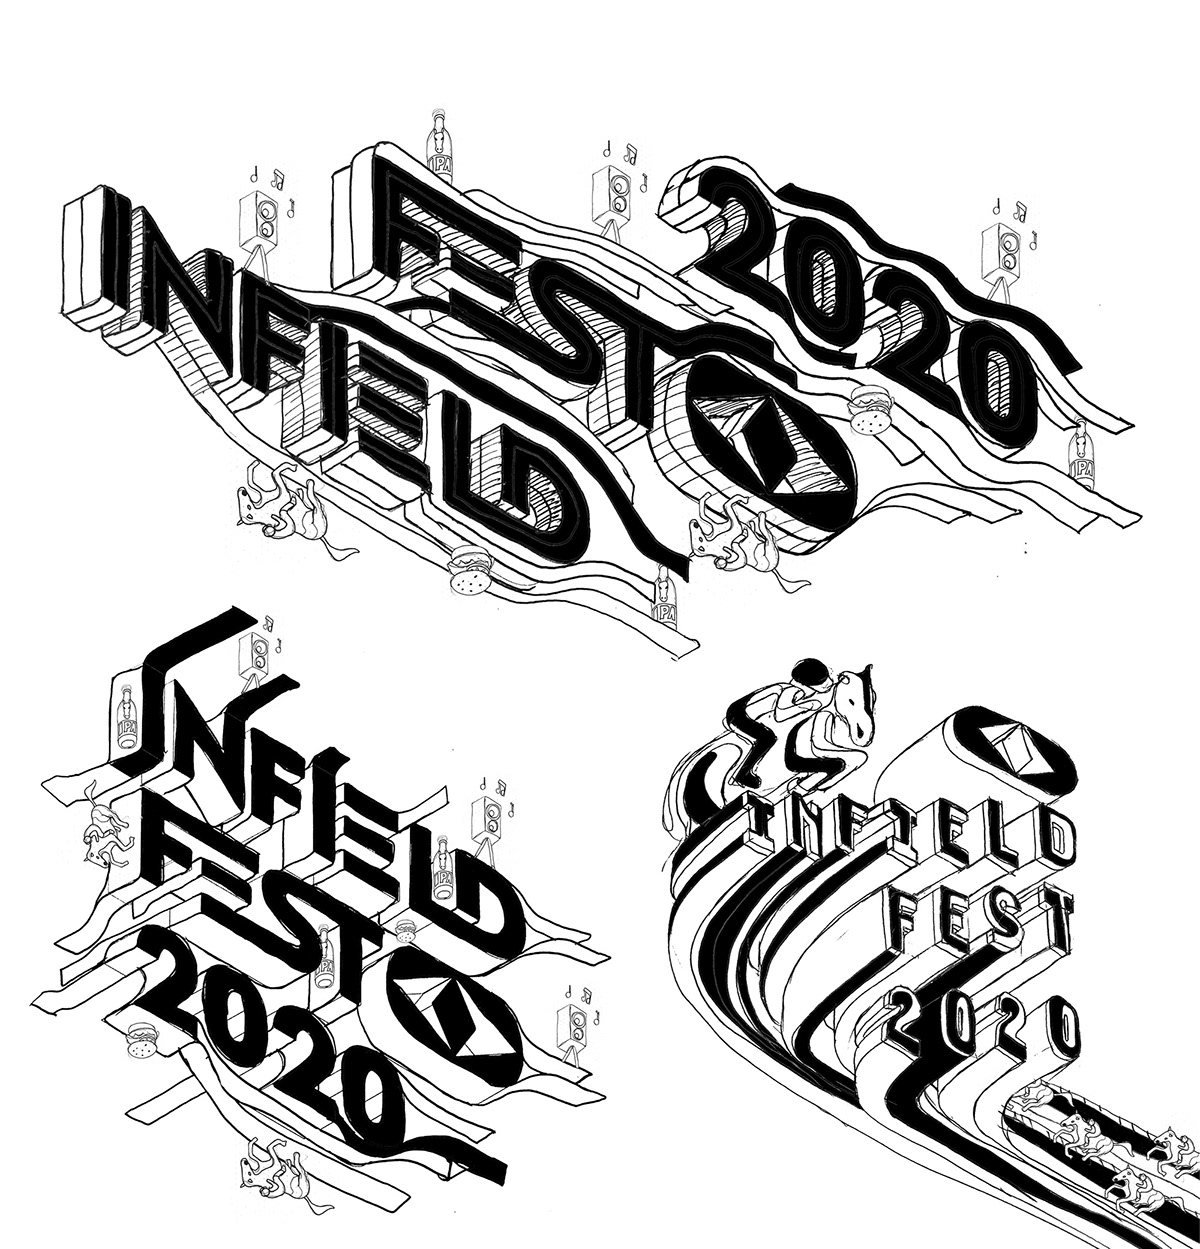 TYPOGRAPHIC IDENTITY FOR A MUSIC FESTIVAL IN THE UNITED STATES